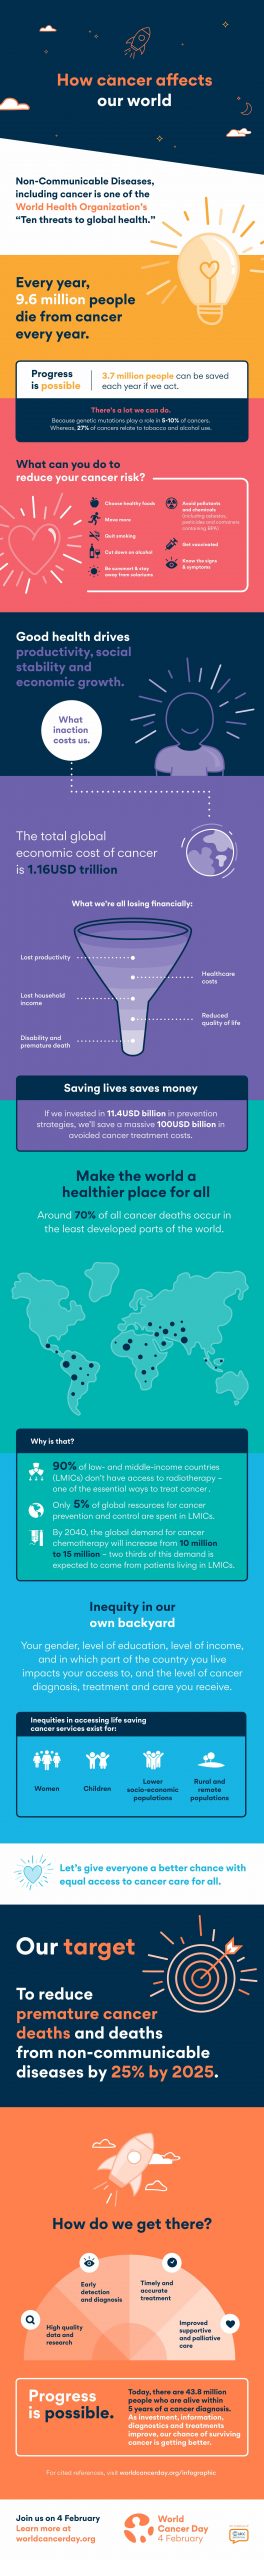 Infographic world cancer day_small